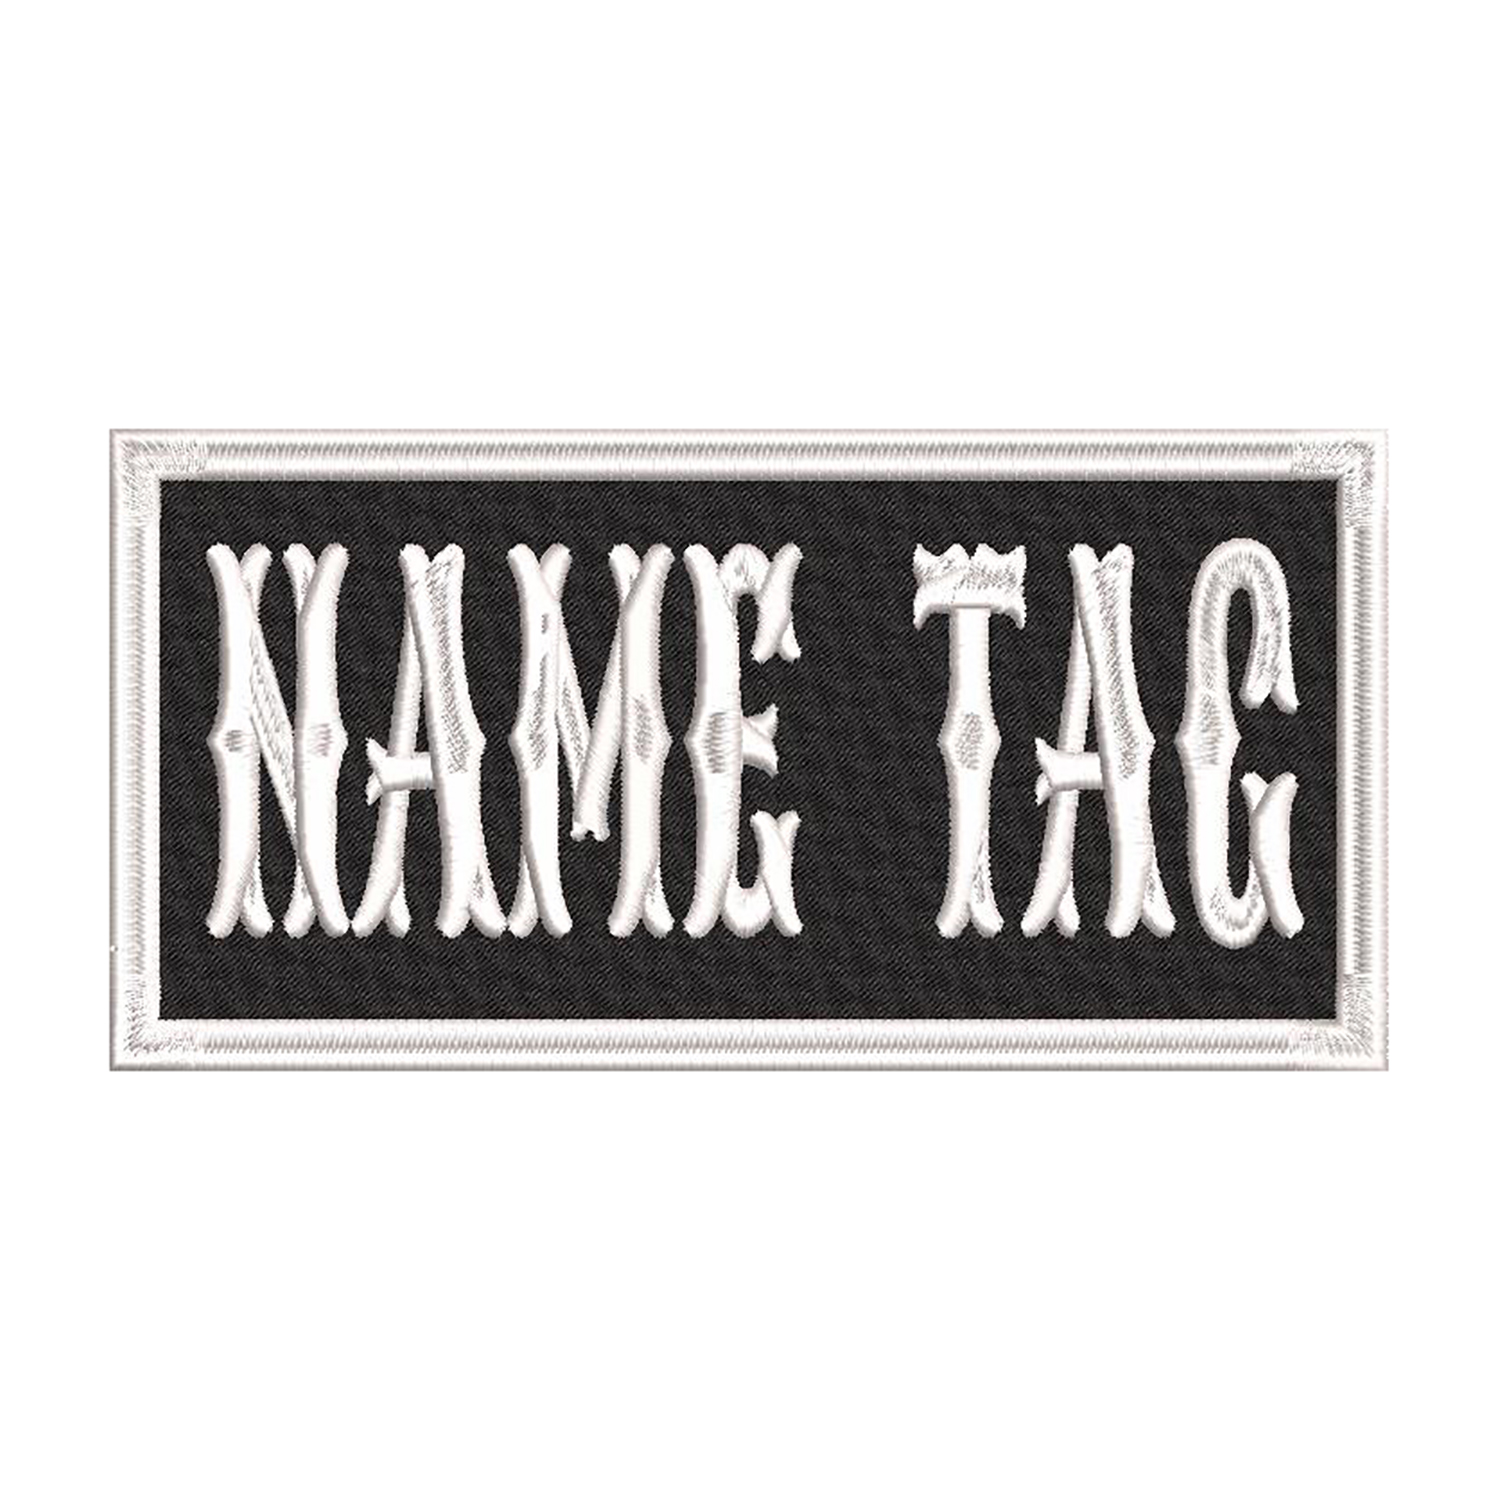 4 x 2 Custom Embroidered Name Tag Biker Patch